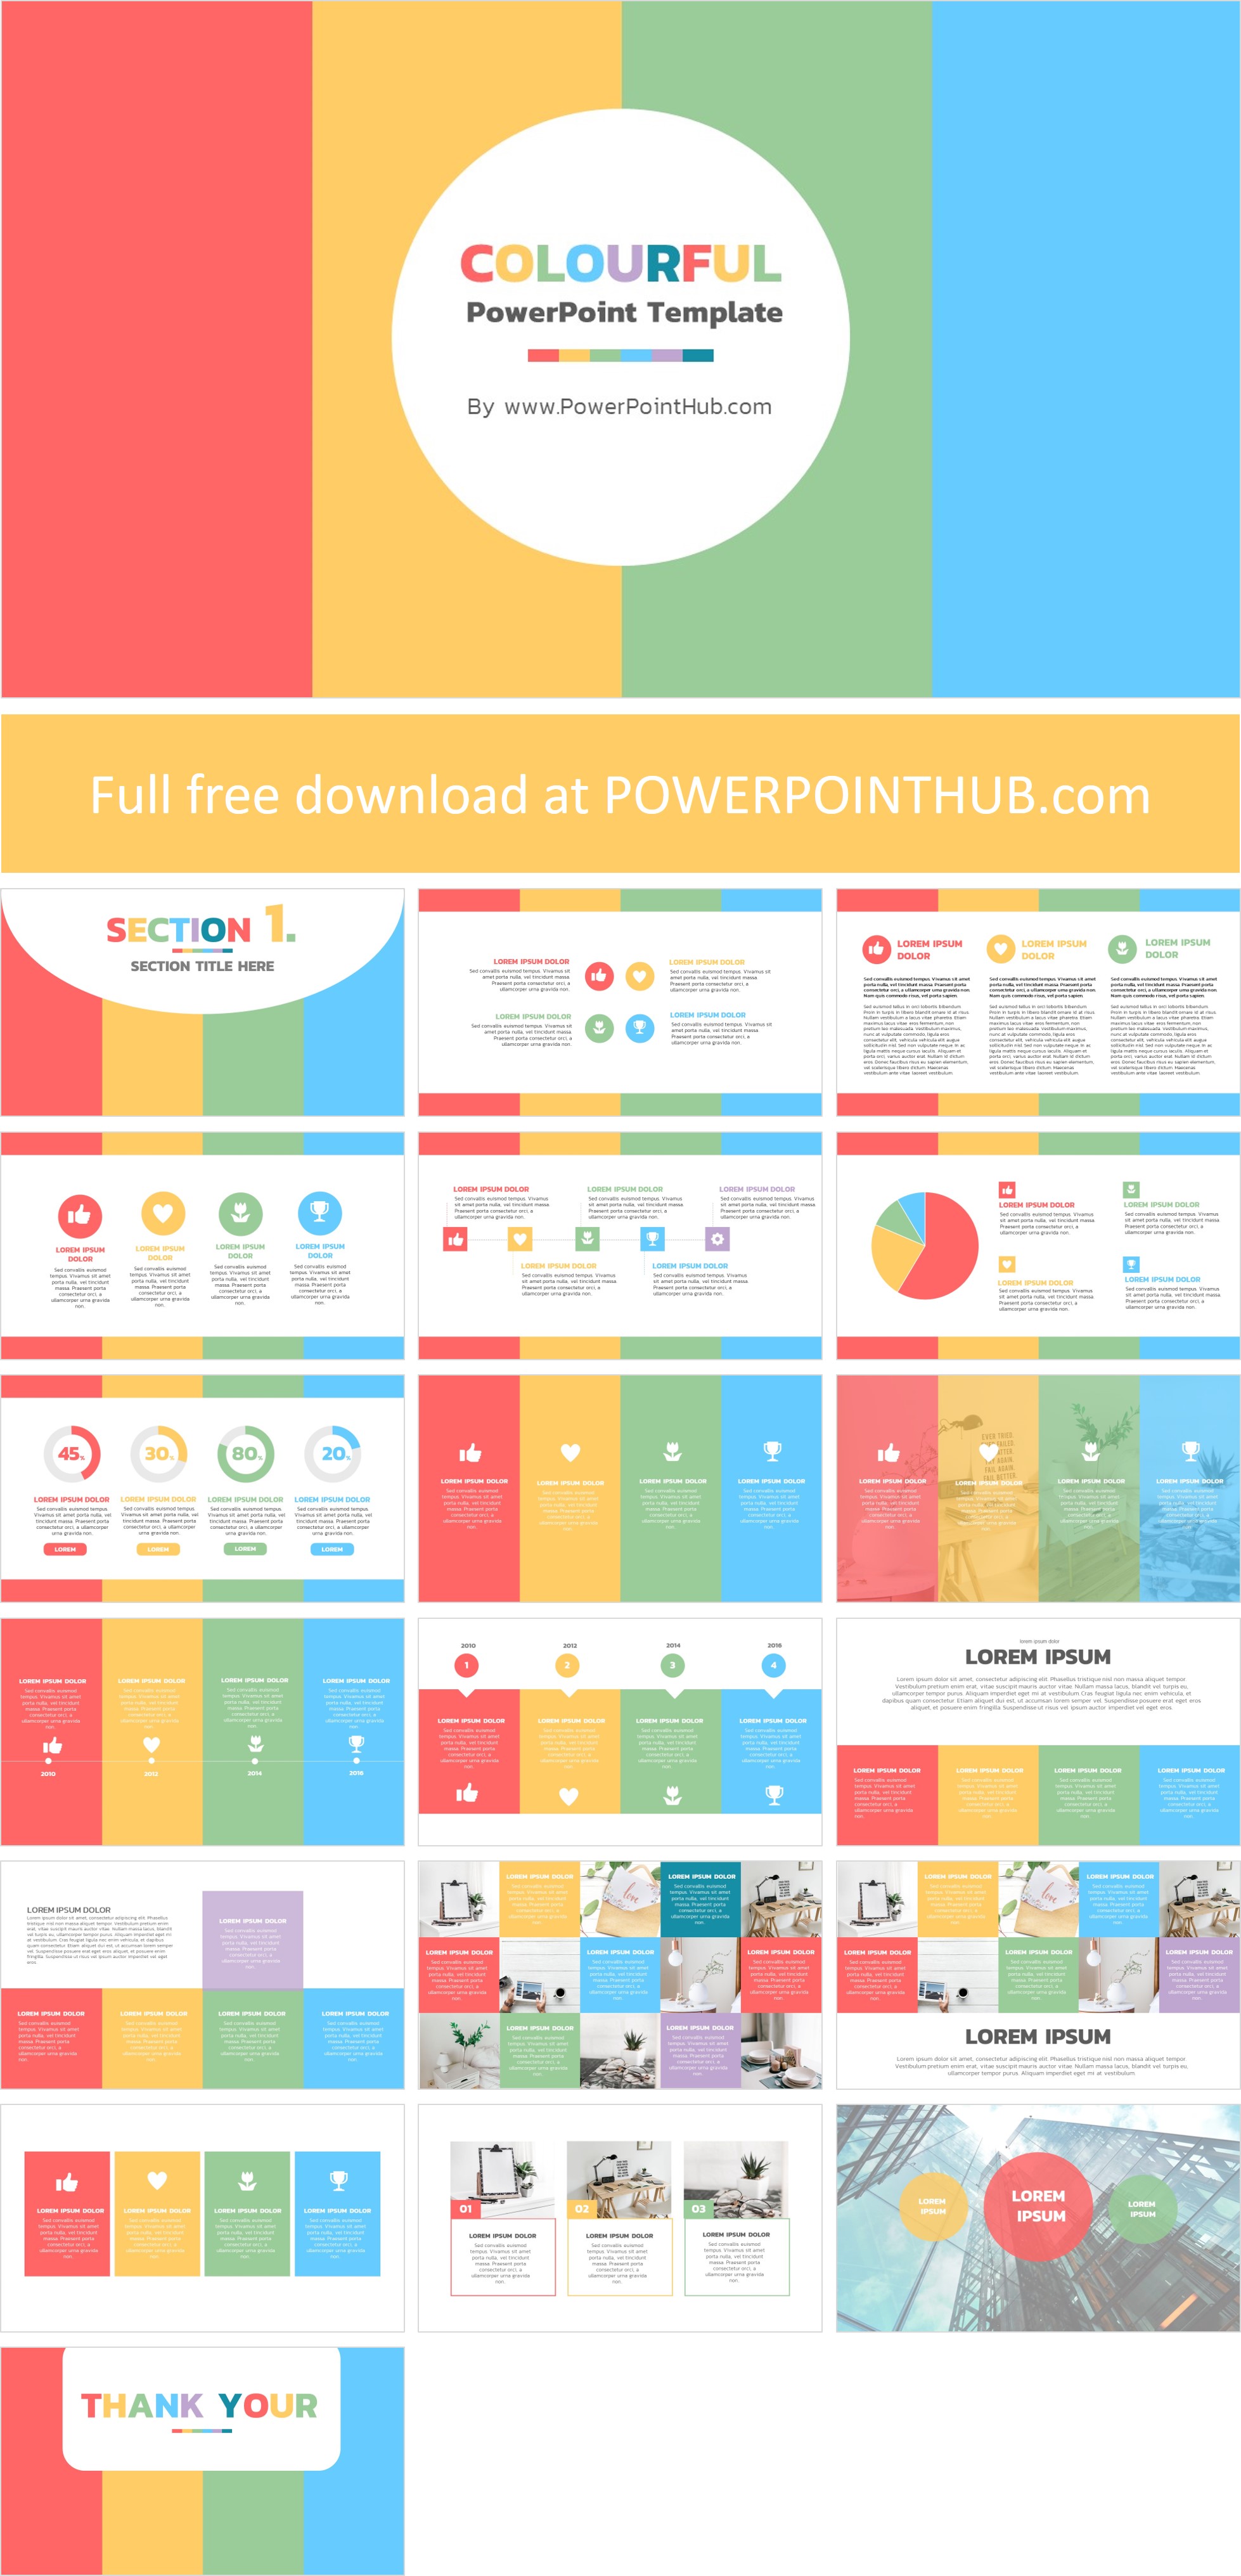 Free Colorful PowerPoint Template is a creative business presentation layout using multiple colors. This template to be used as colorful PowerPoint backgrounds.